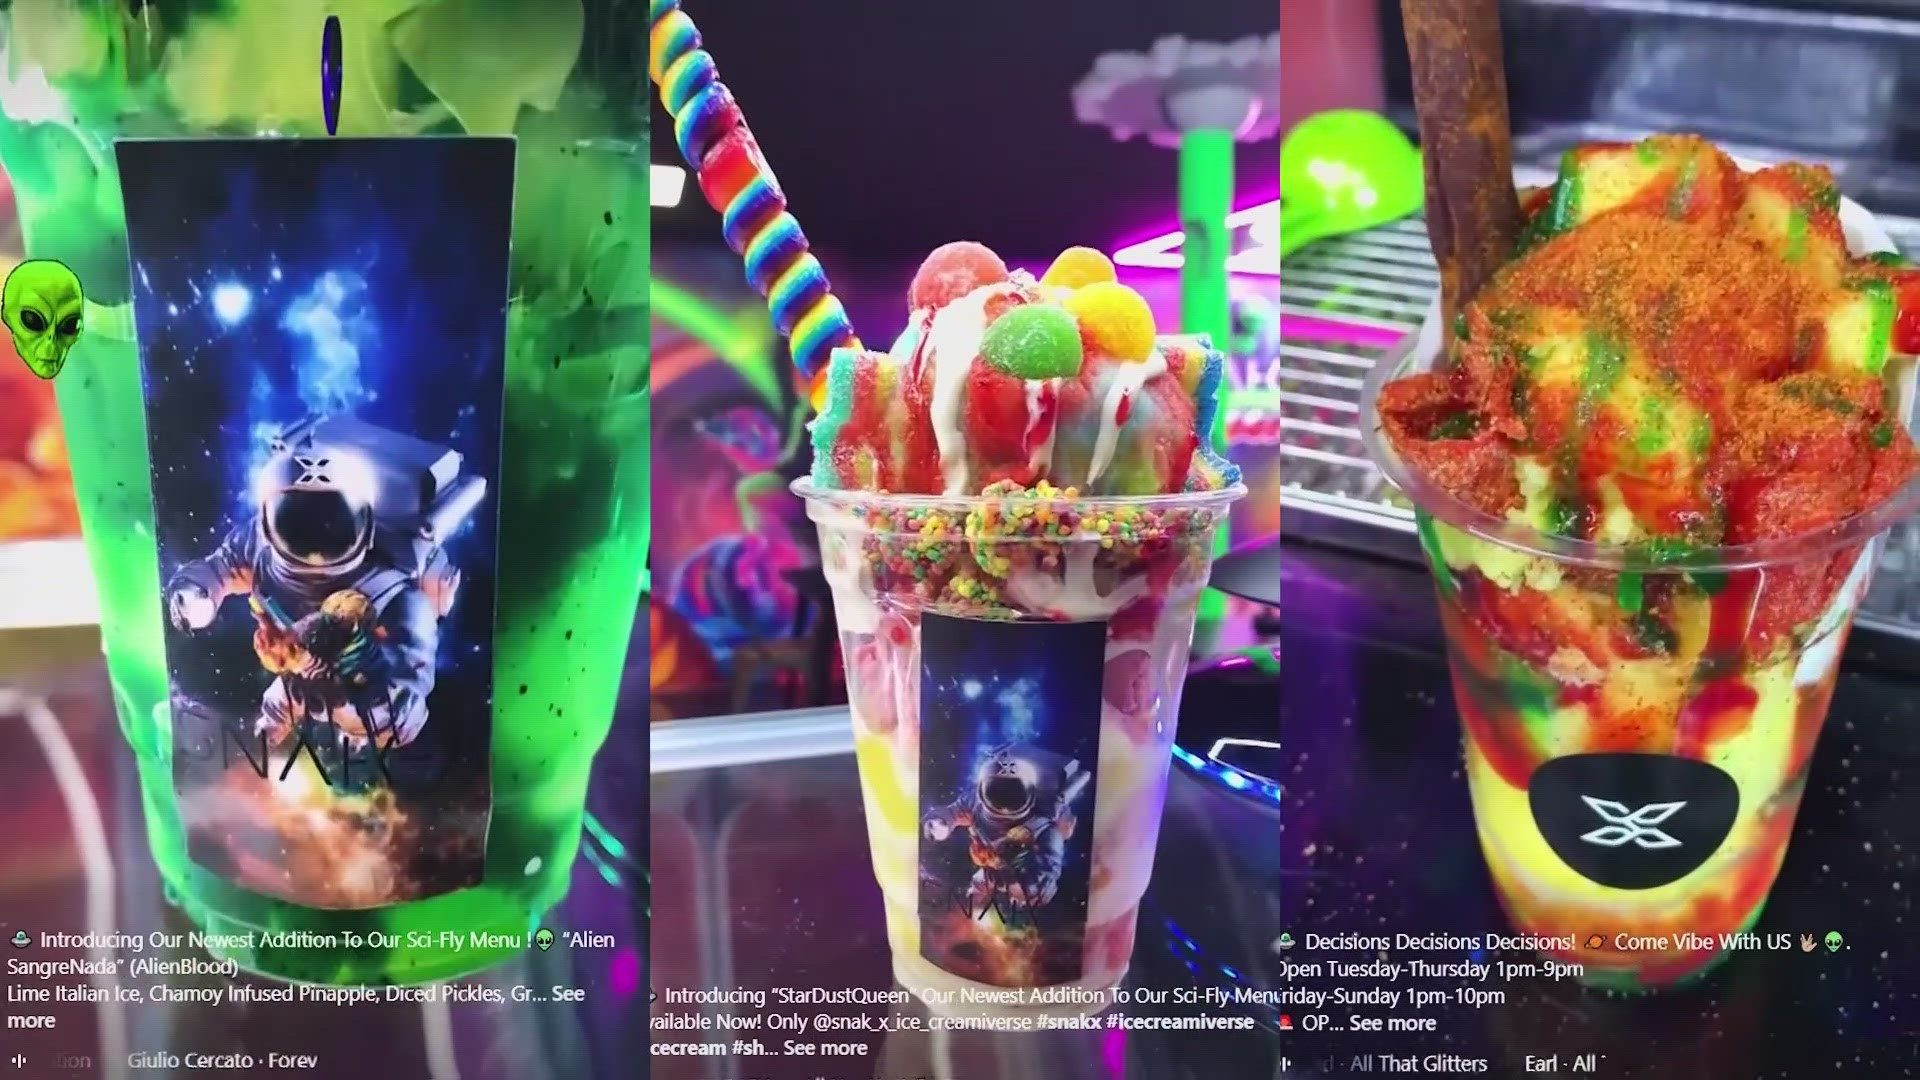 SNAK-X is serving up cosmic creations in an out-of-this-world atmosphere that will have you feeling like a kid again.